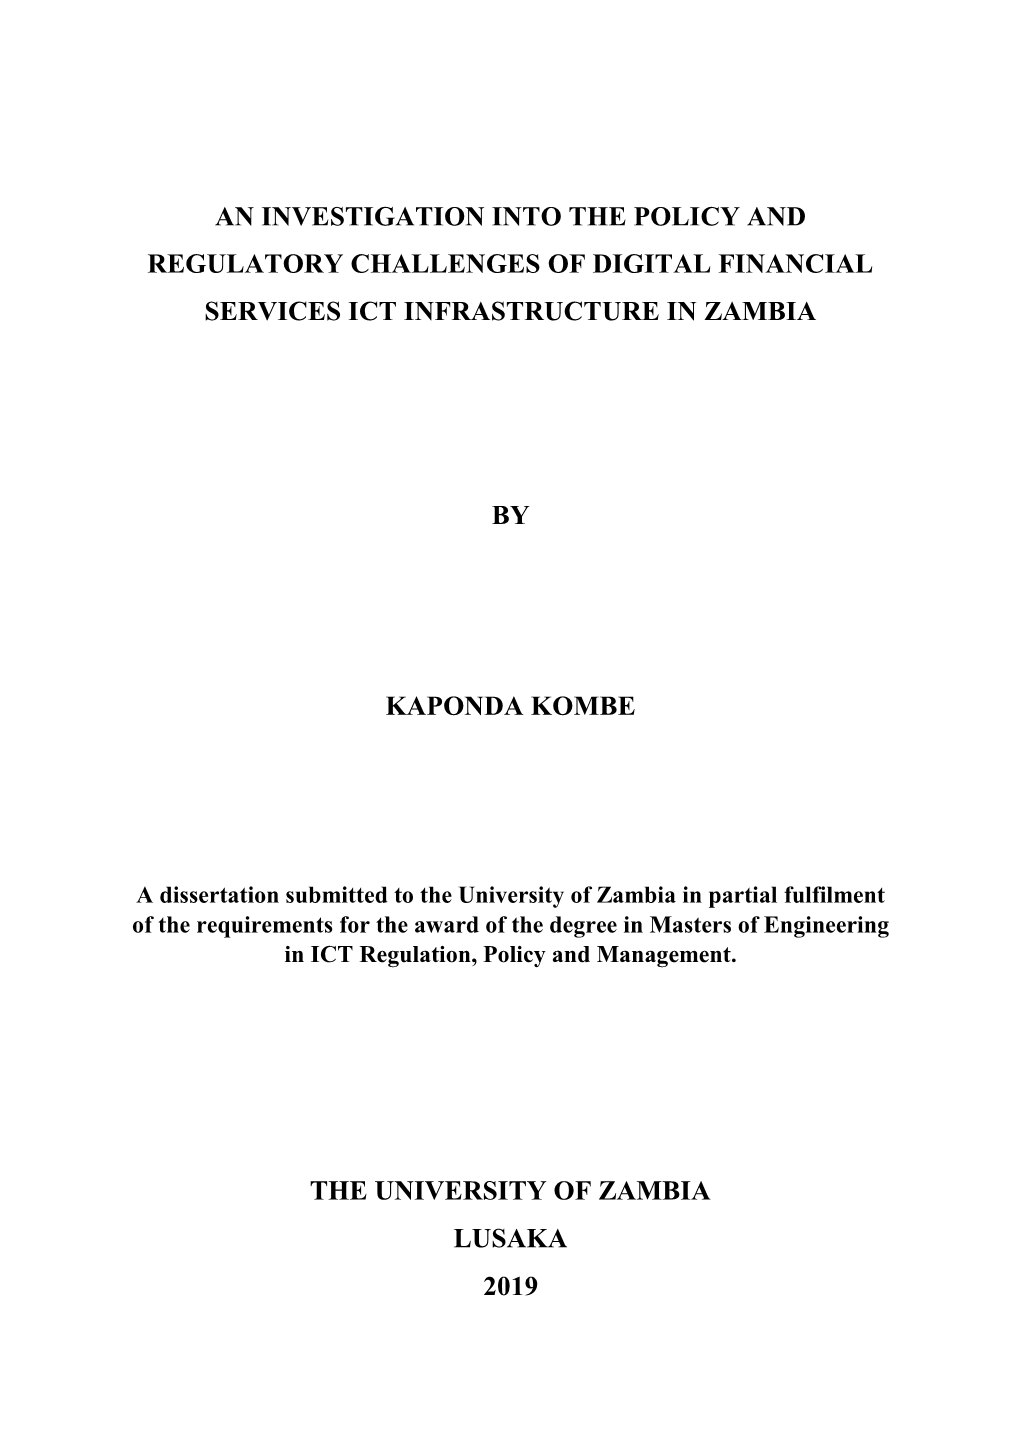 An Investigation Into the Policy and Regulatory Challenges of Digital Financial Services Ict Infrastructure in Zambia